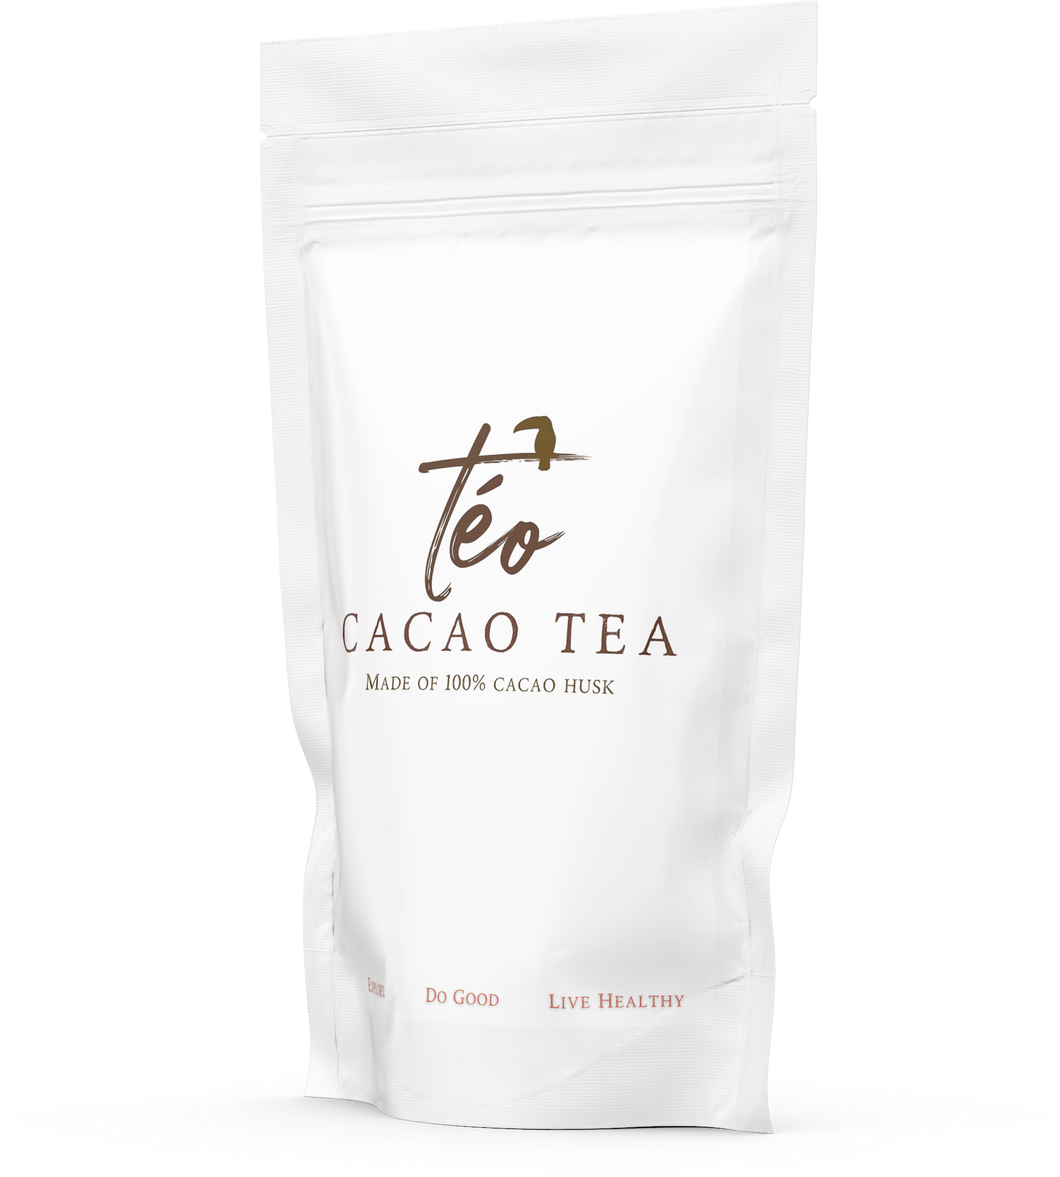 Cacao tea is a lighter beverage you can brew. It has the light flavor of chocolate. Perfect for a wind down hot drink.